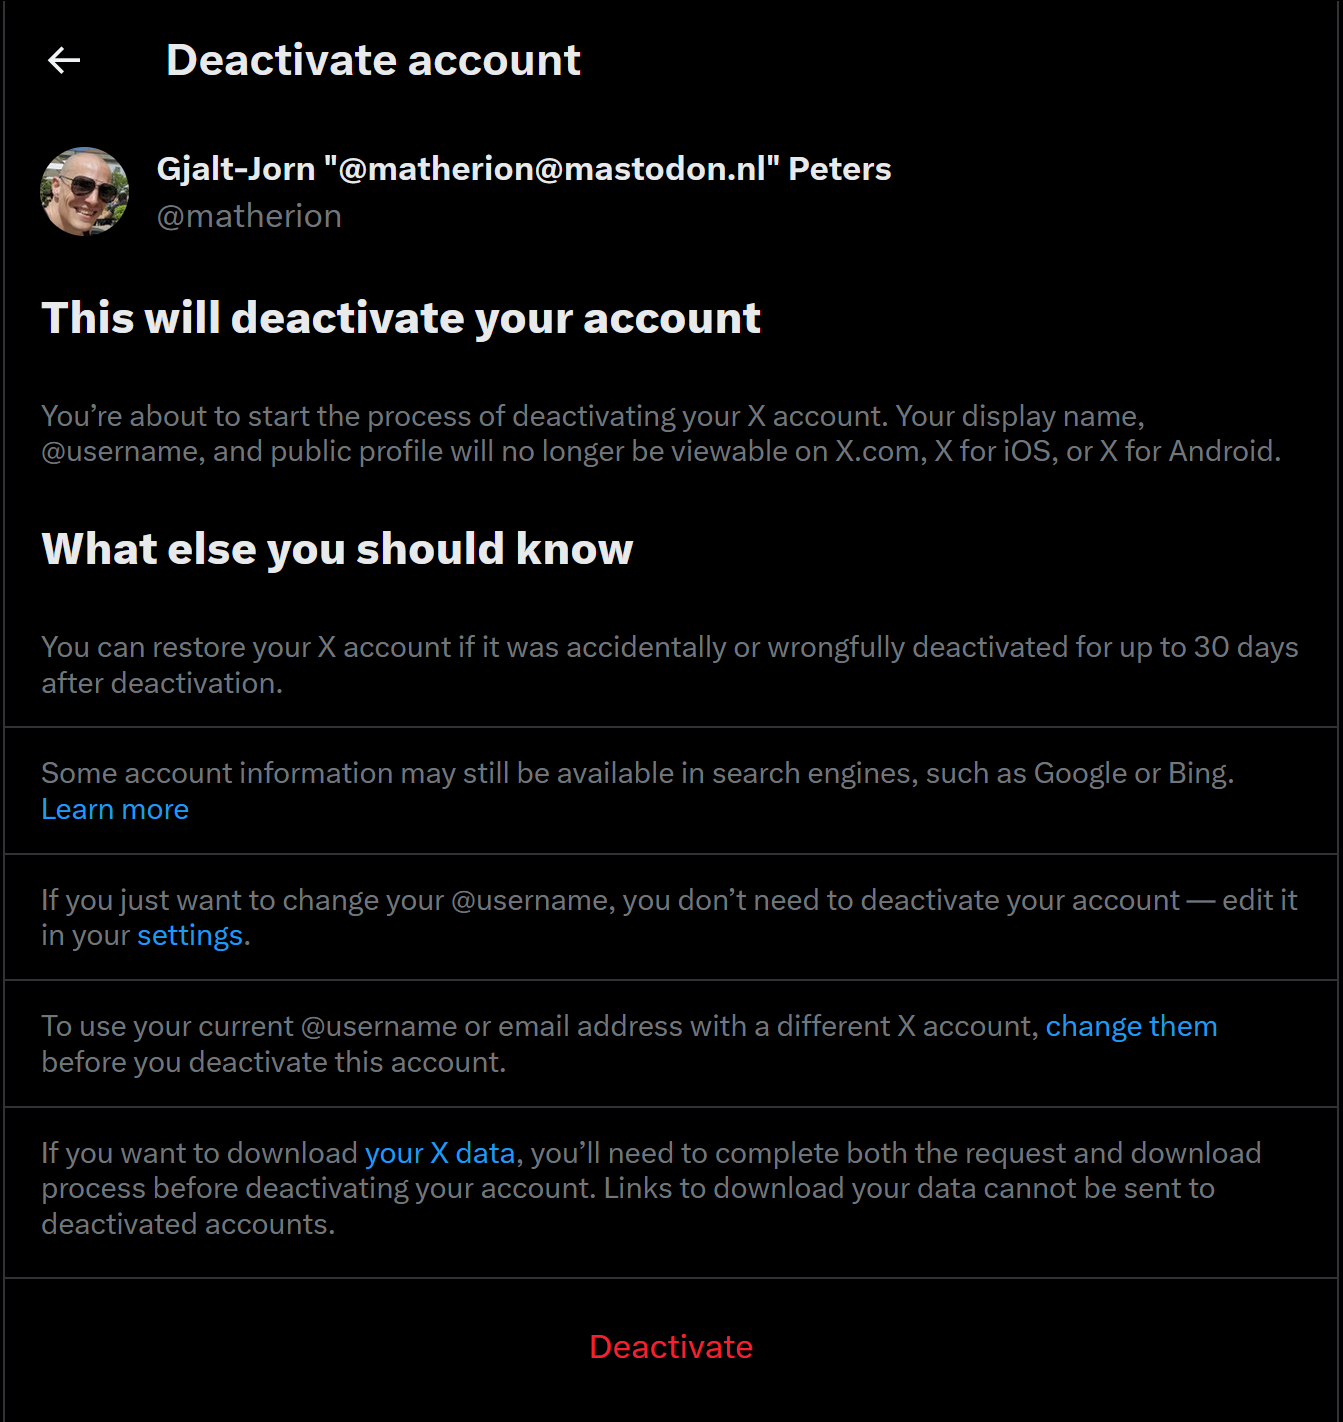 A screenshot from the Twitter/X site showing the dialog where you delete your account.